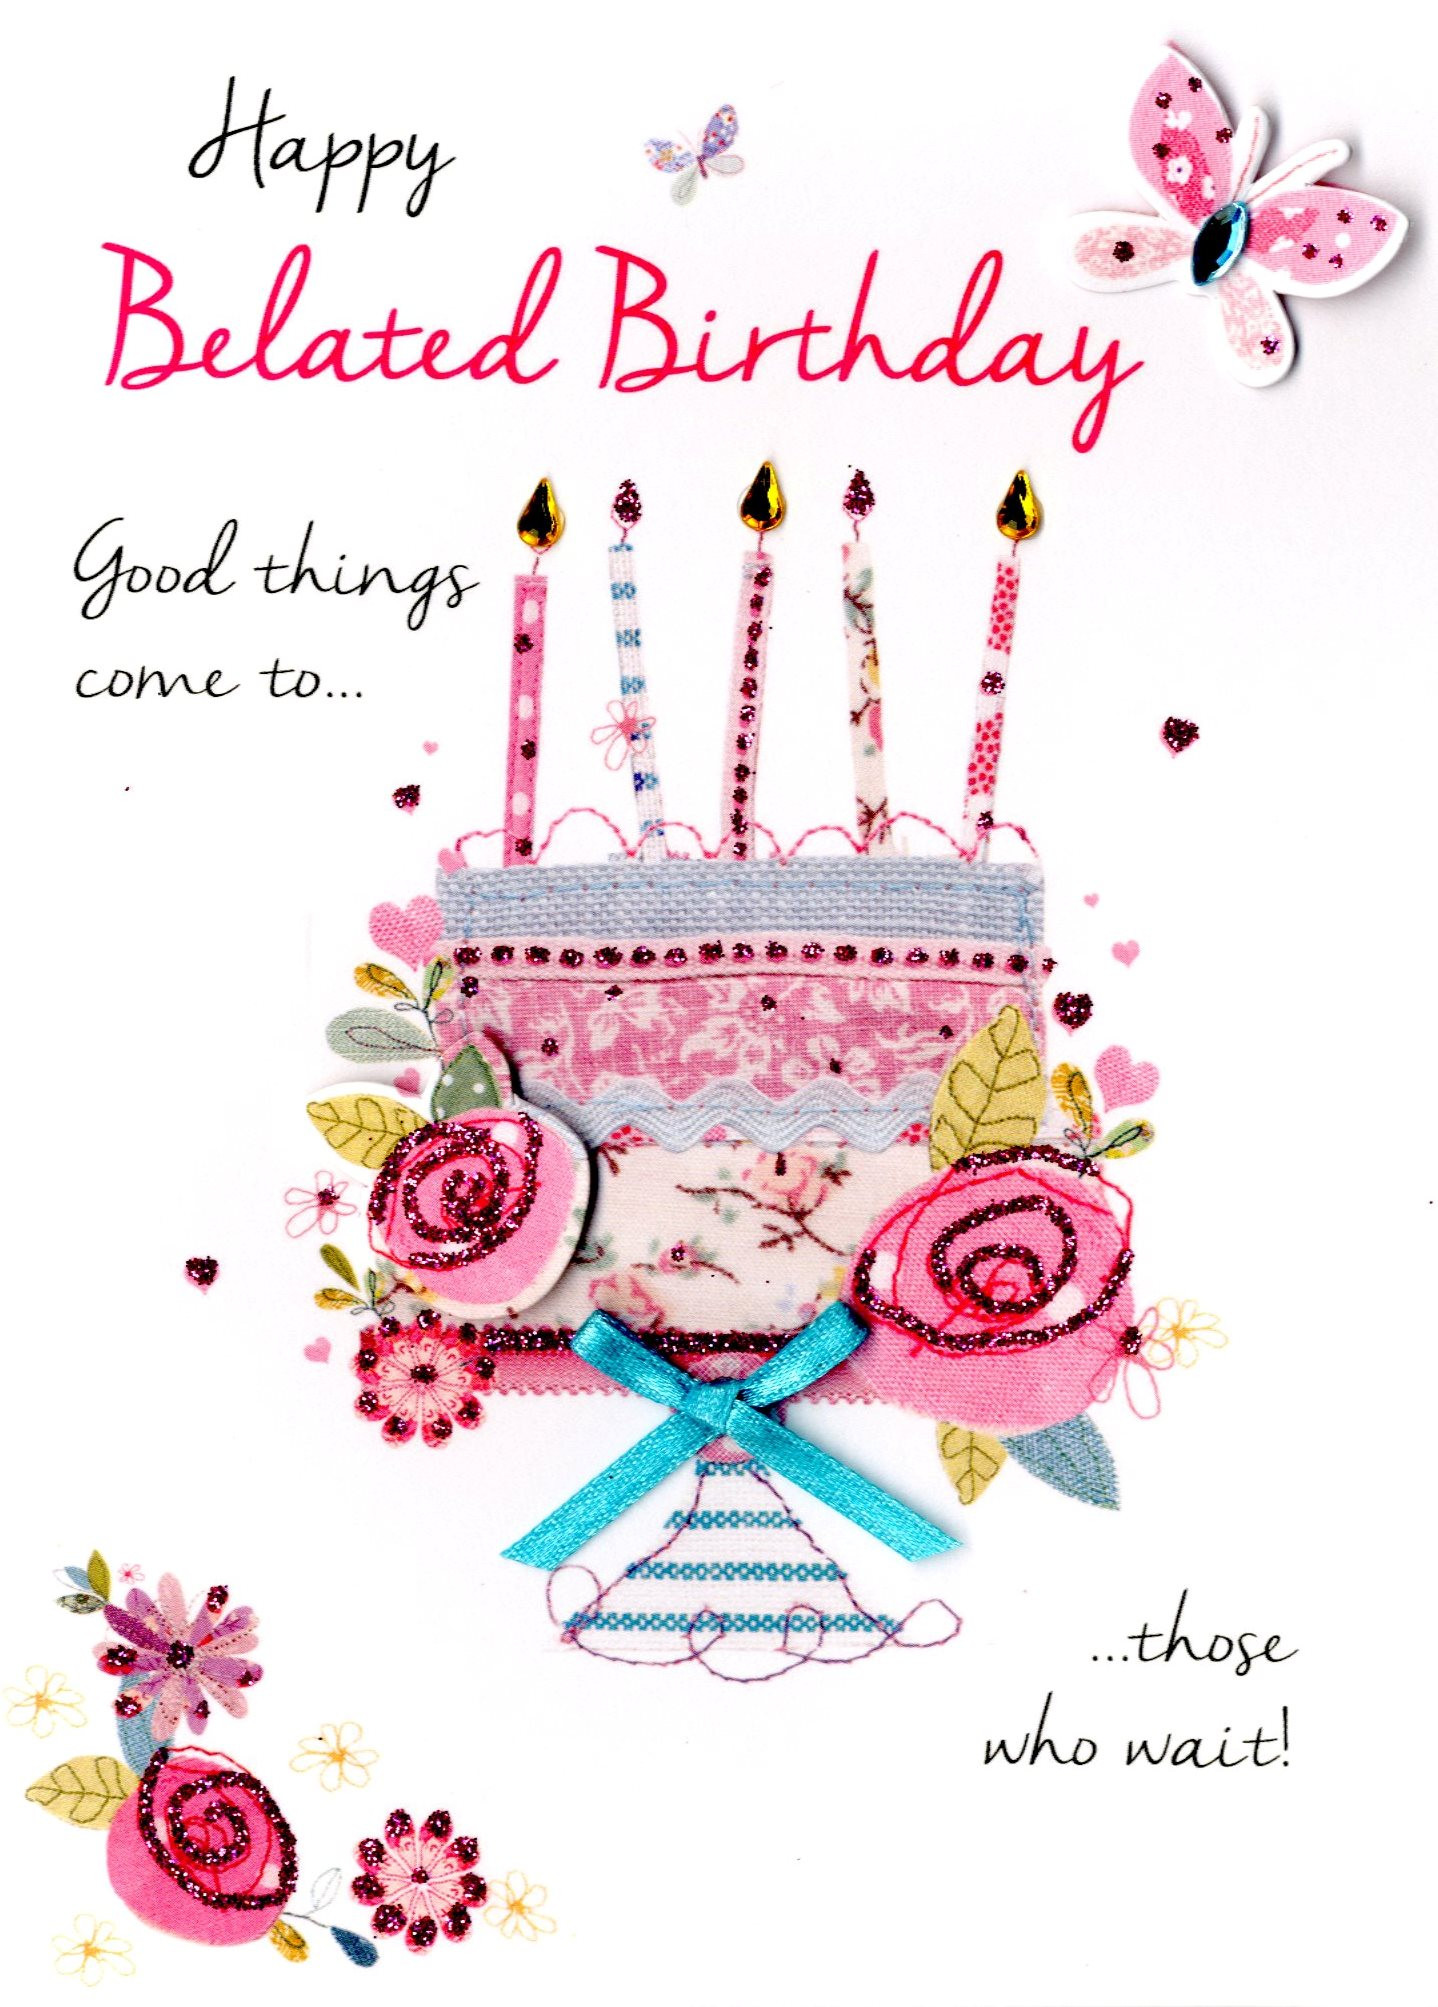 Happy Late Birthday Wishes
 Happy Belated Birthday Greeting Card